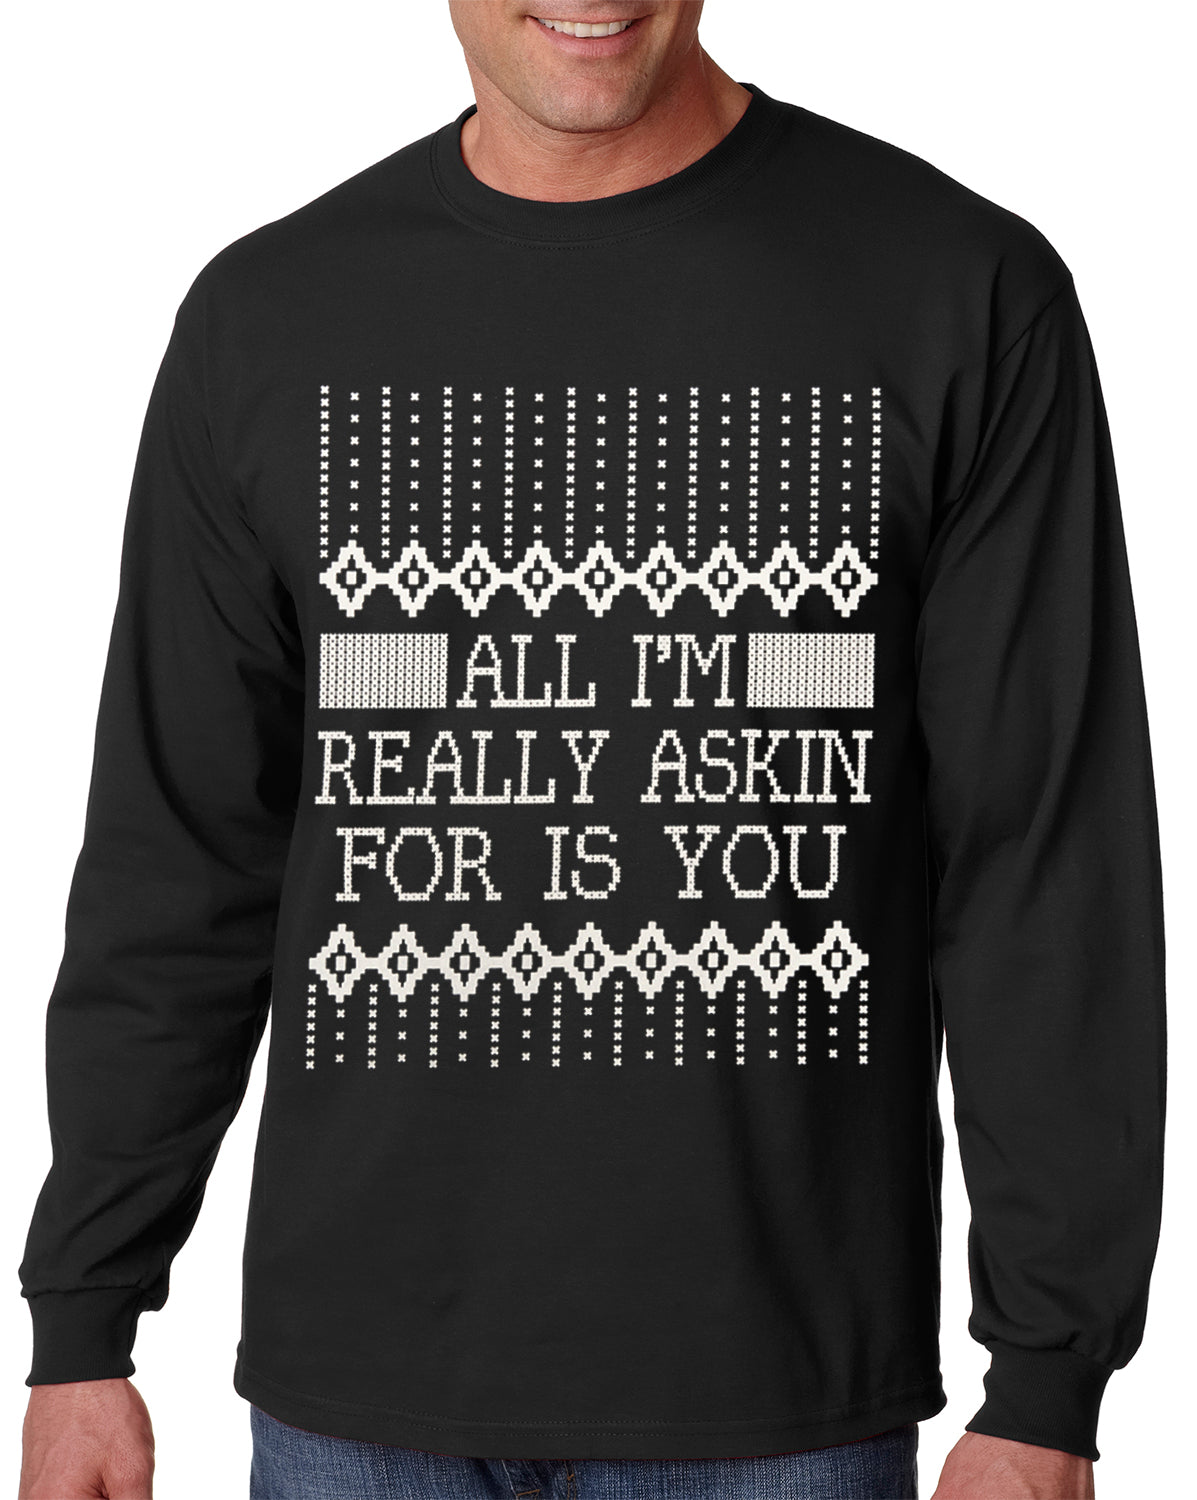 All I'm Asking For is You Long Sleeve T-shirt Black